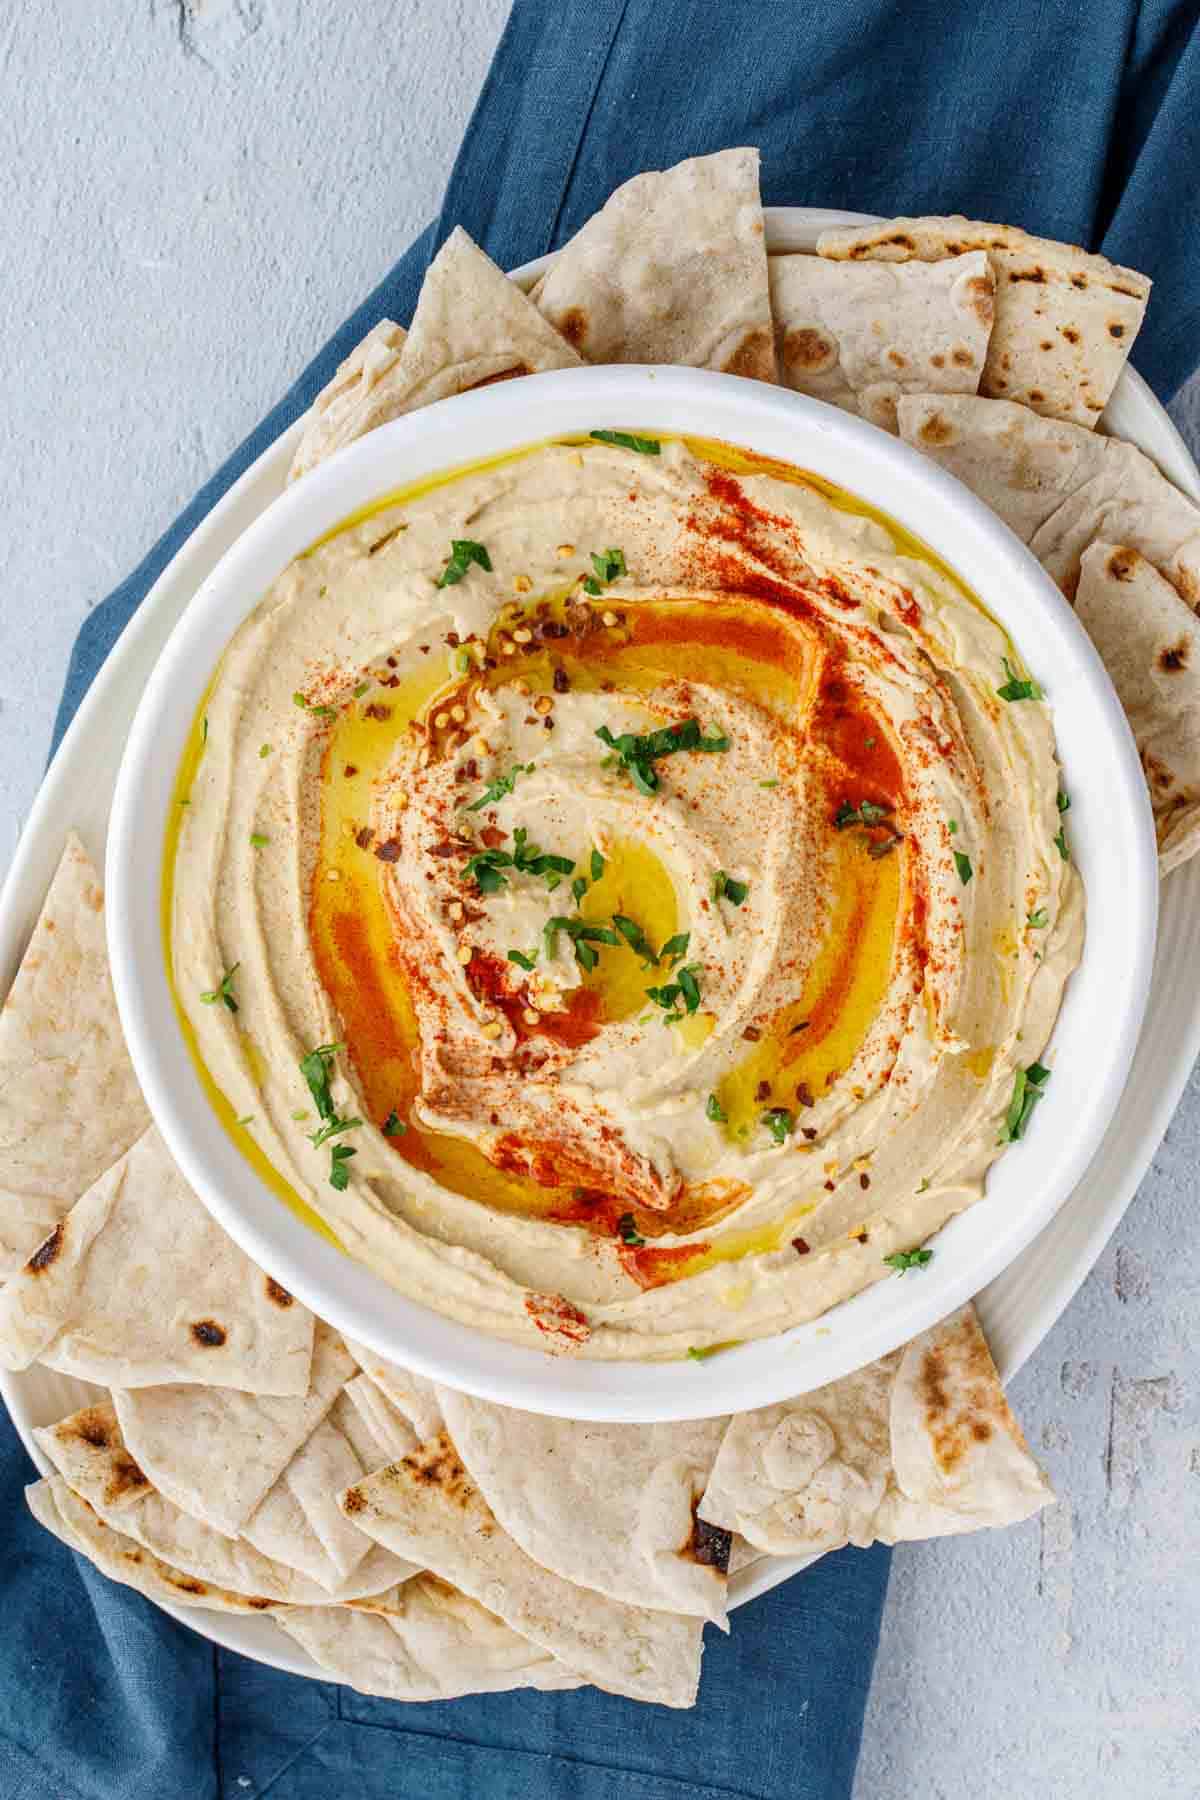 Hummus in a serving bowl with a side of pita bread.